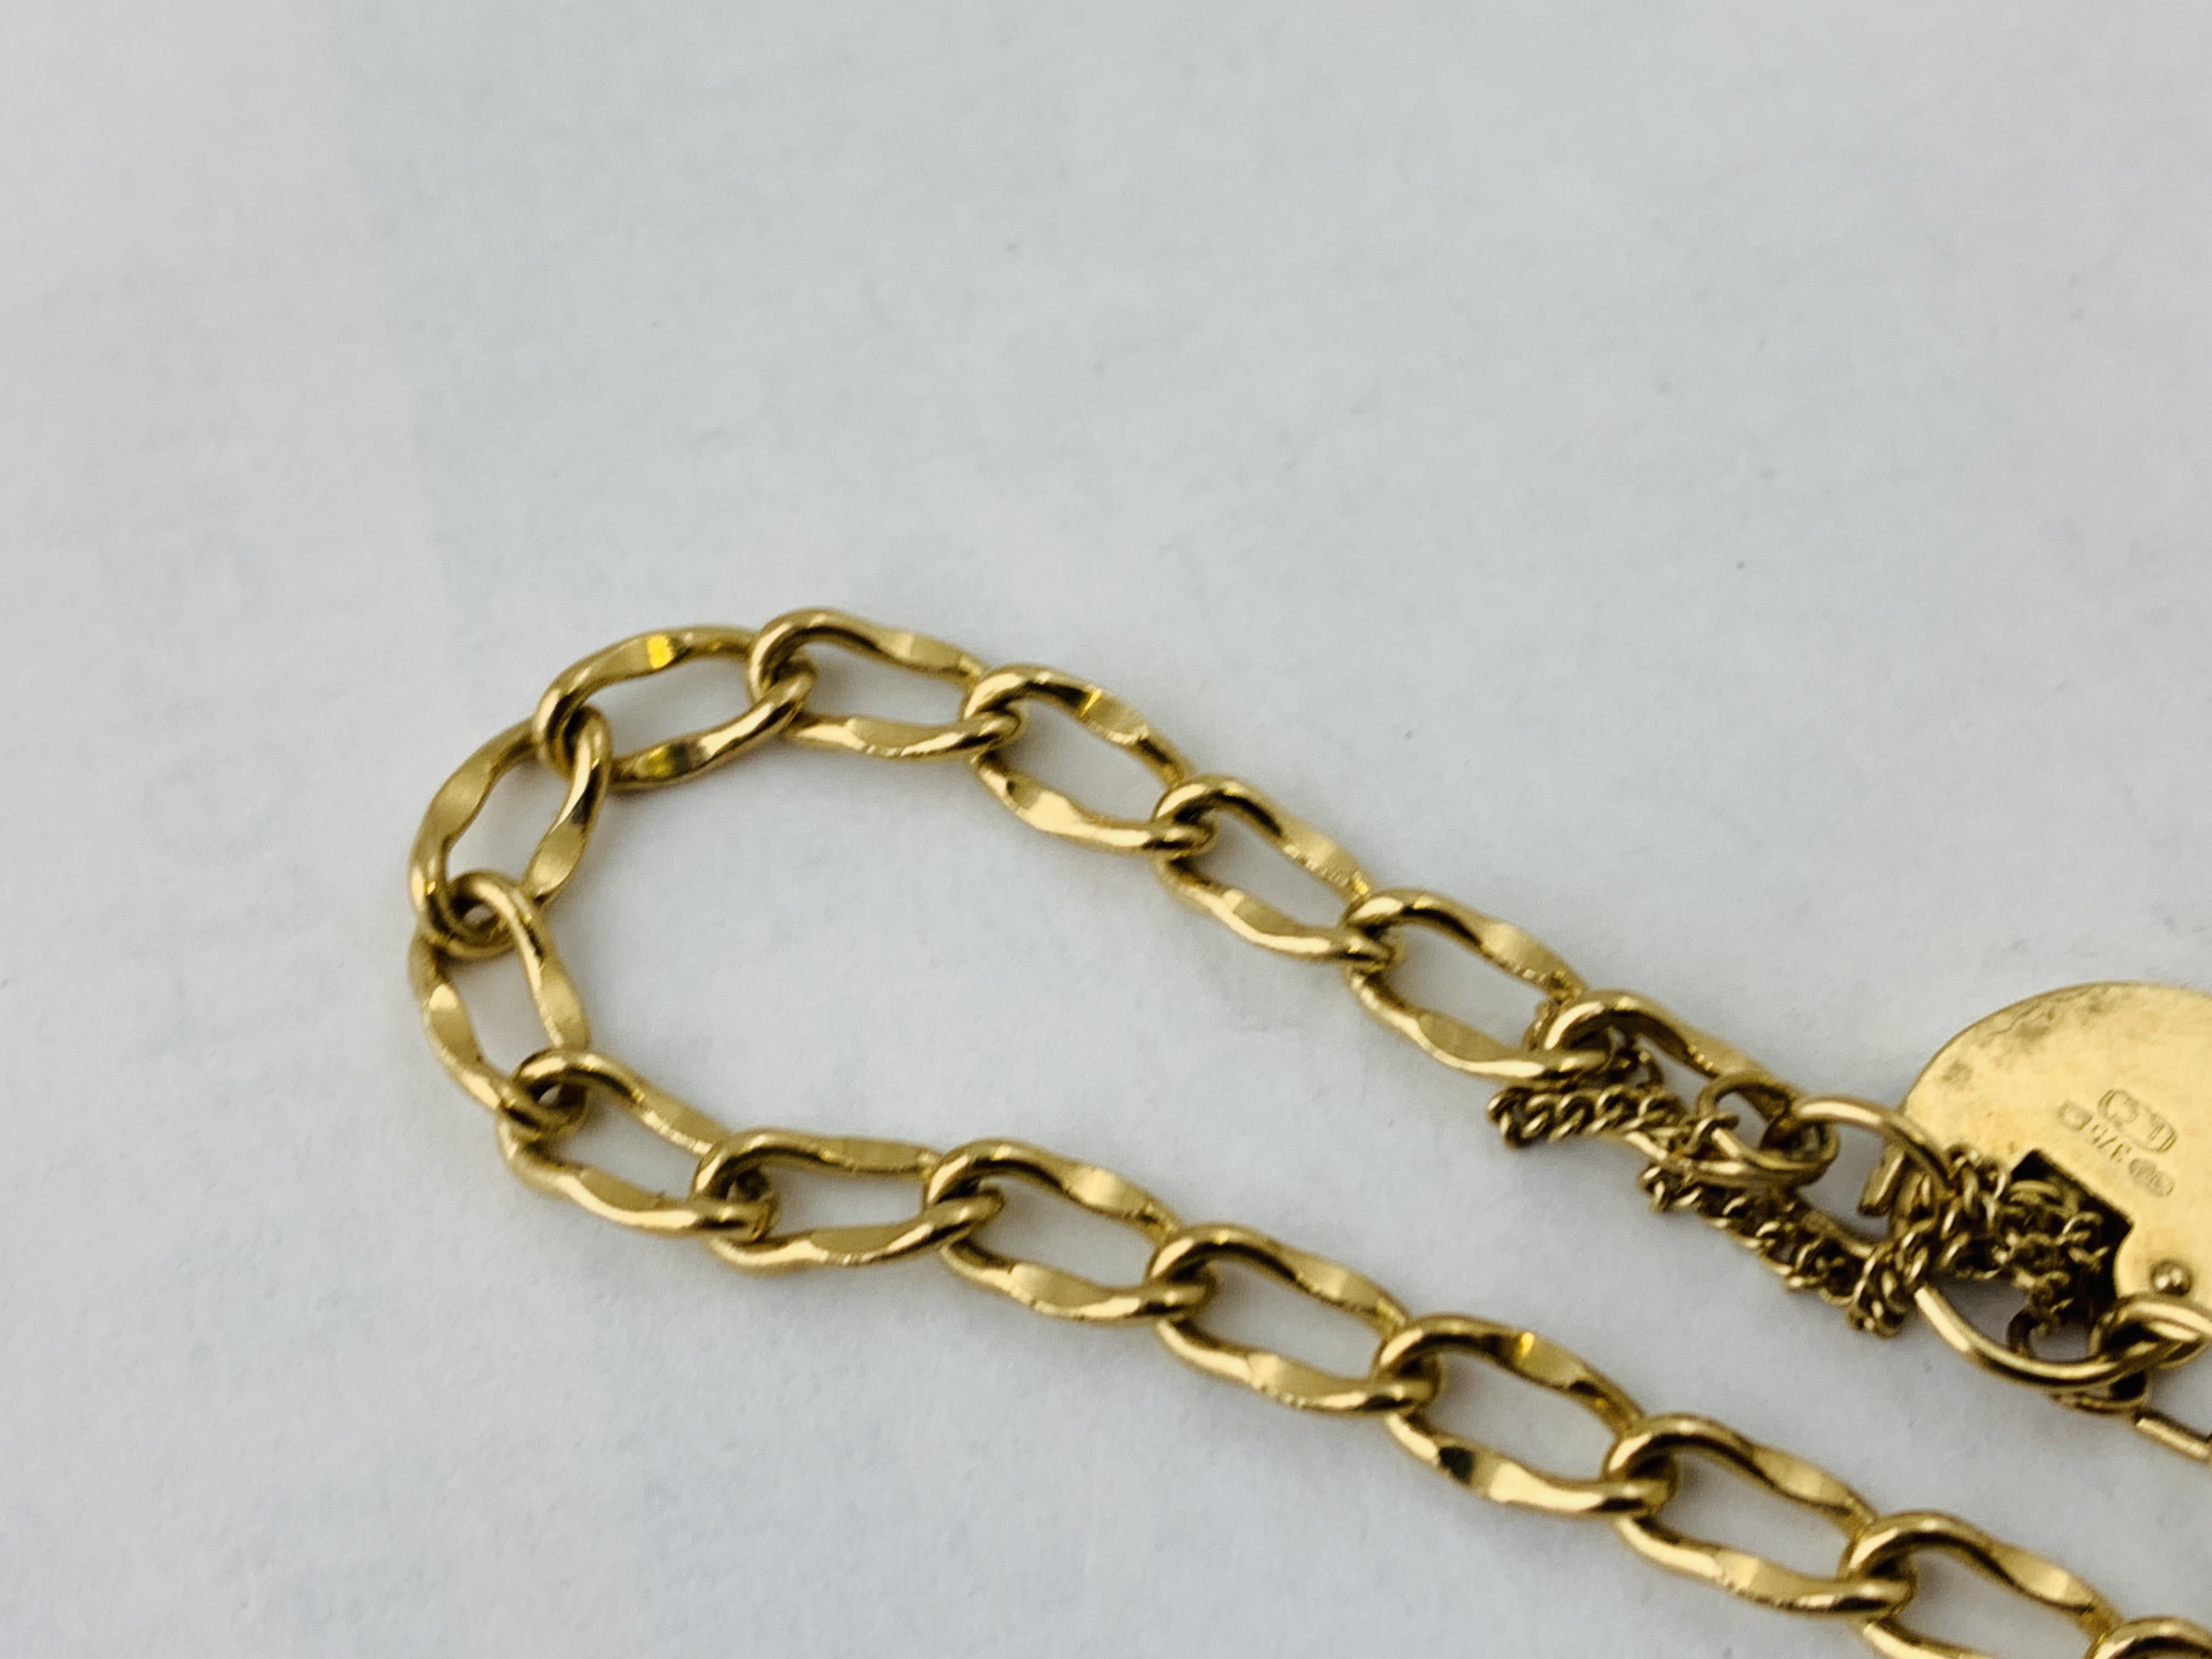 A 9CT GOLD BRACELET WITH HEART SHAPED PADLOCK CLASP AND YELLOW STONE SET PENDANT ATTACHED L 200MM - Image 4 of 9